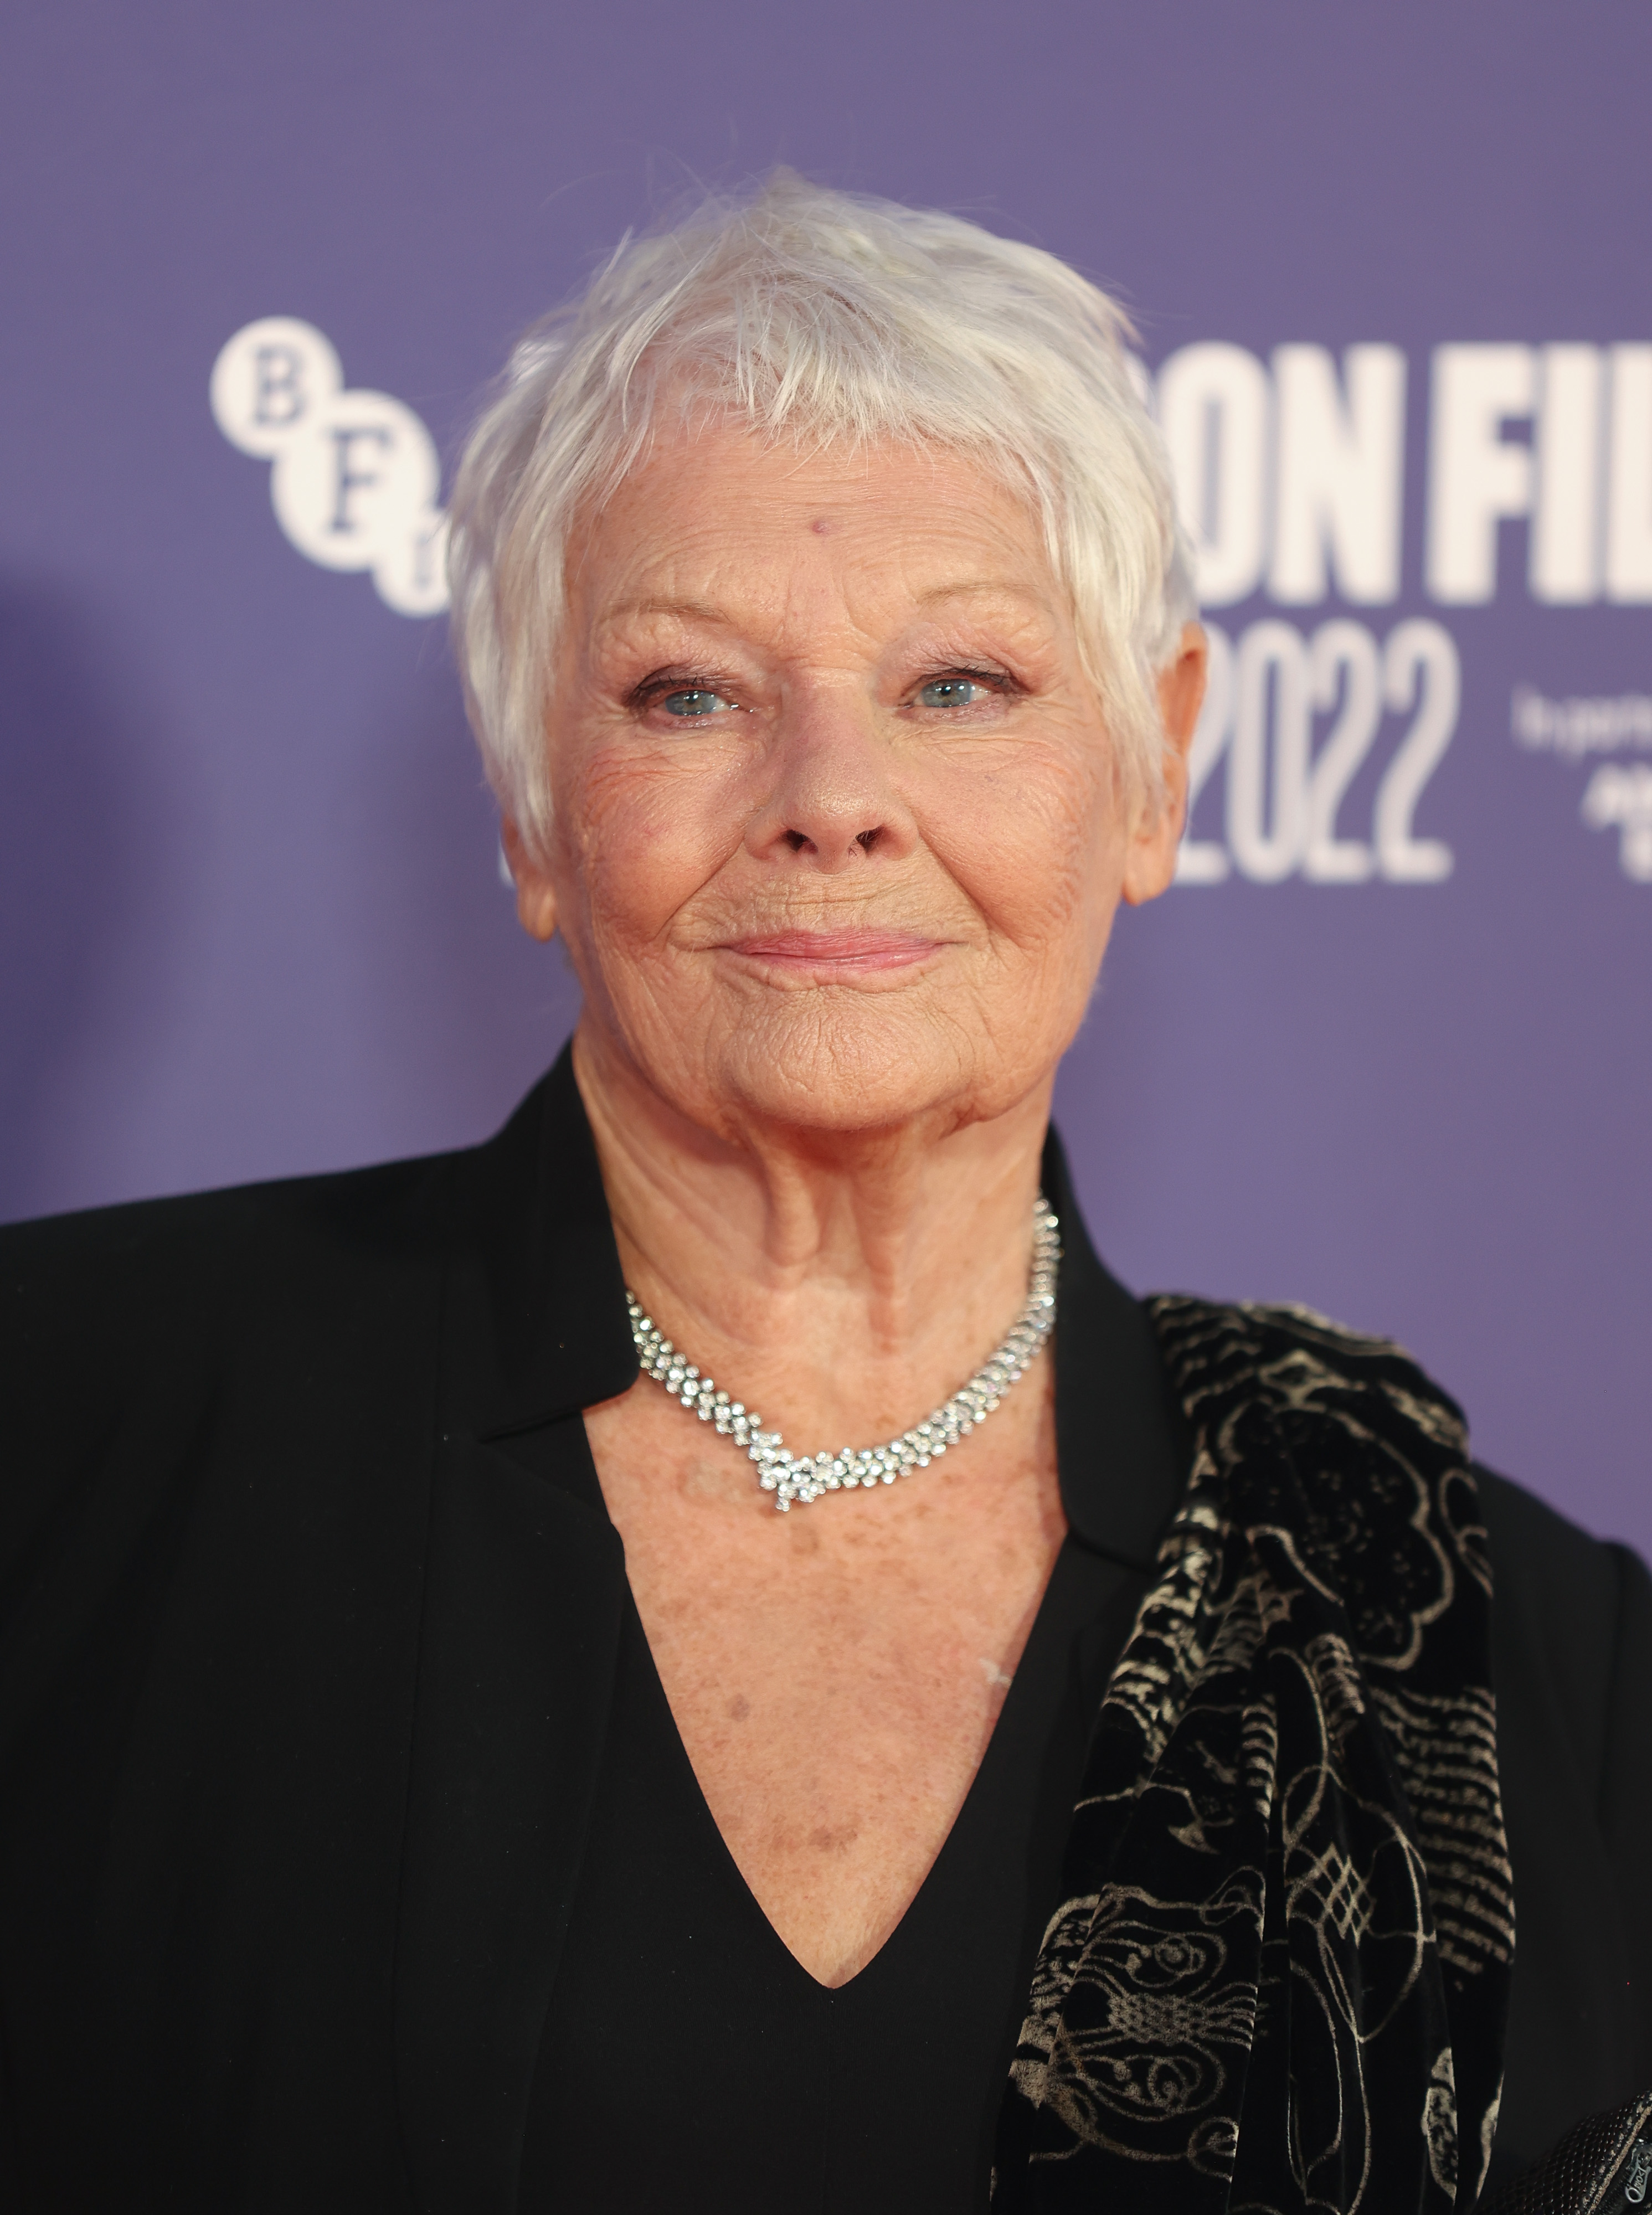 Dame Judi Dench at the "Allelujah" European premiere in London, 2022 | Source: Getty Images